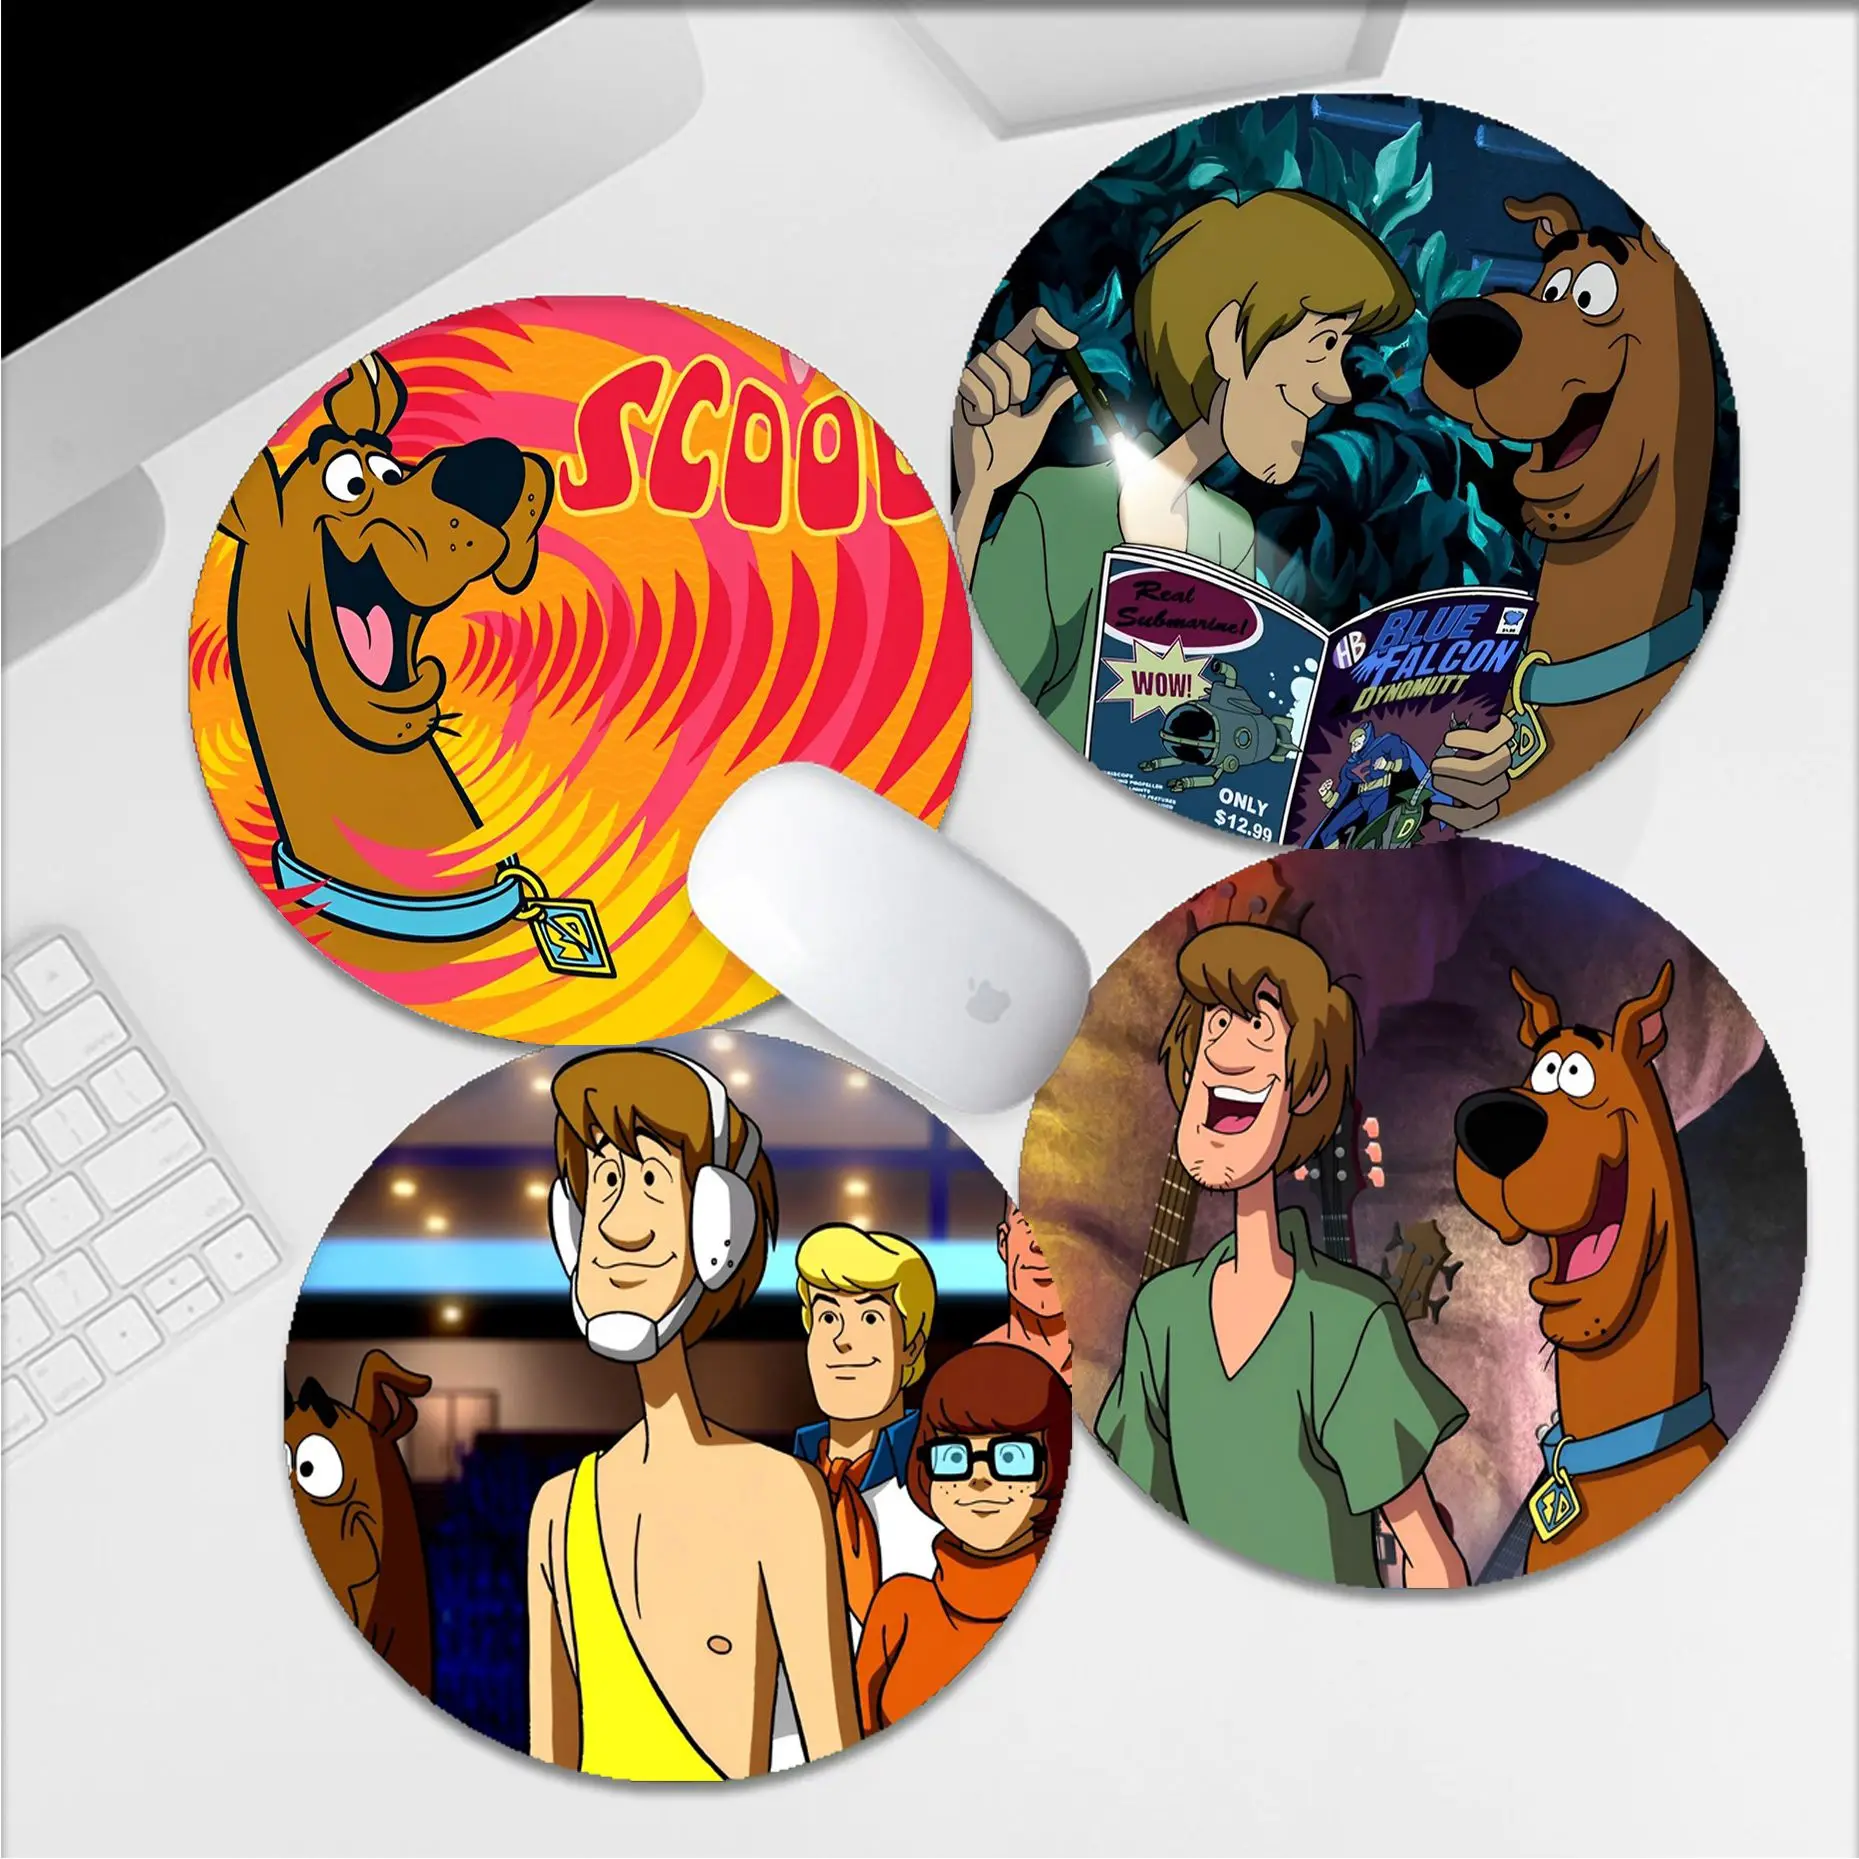 

Scooby Anime Doo Mousepad Small Round Big Promotion Table Mat Mousepad Computer Keyboard Pad Games Pad Padmouse Desk Play Mats